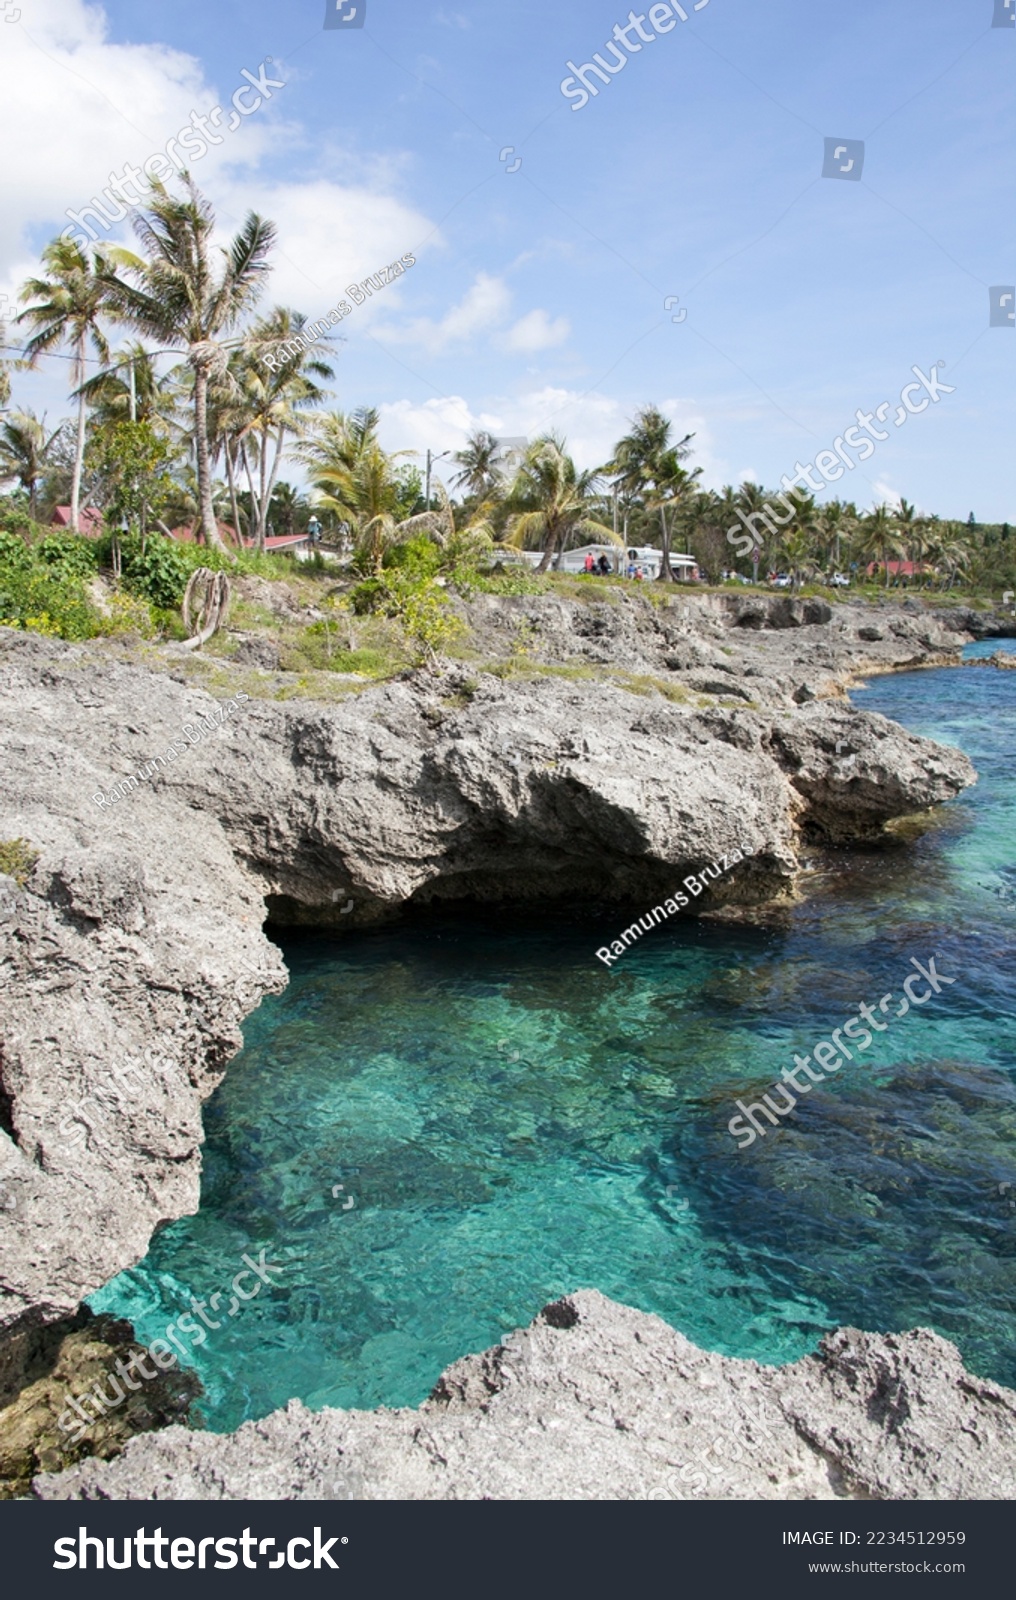 The turquoise color waters and eroded rocky shore in Tadine village on Mare island (New Caledonia). #2234512959